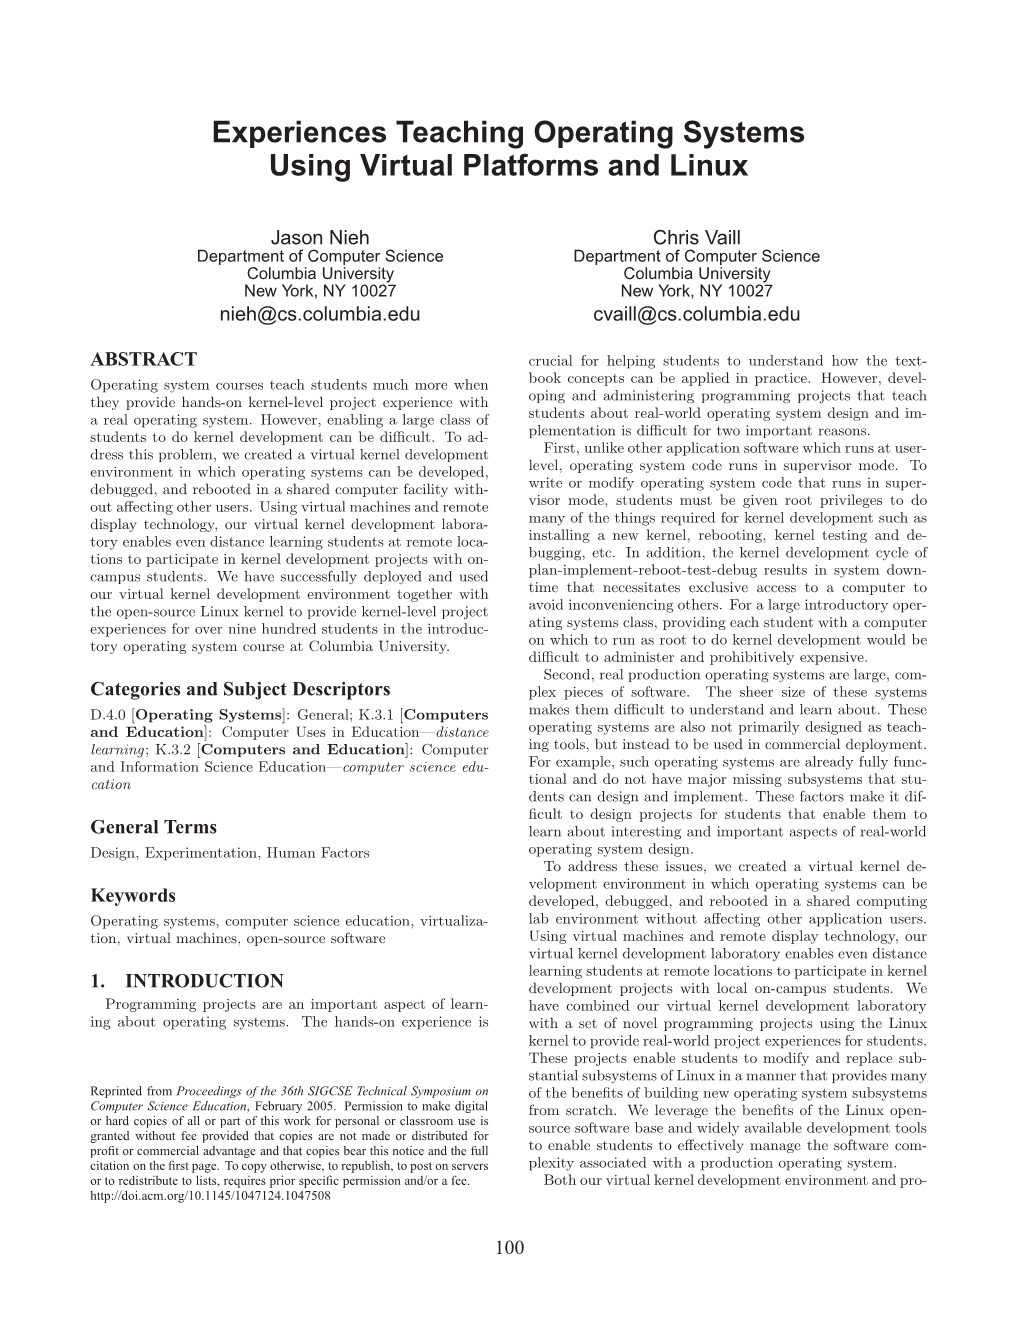 Experiences Teaching Operating Systems Using Virtual Platforms and Linux